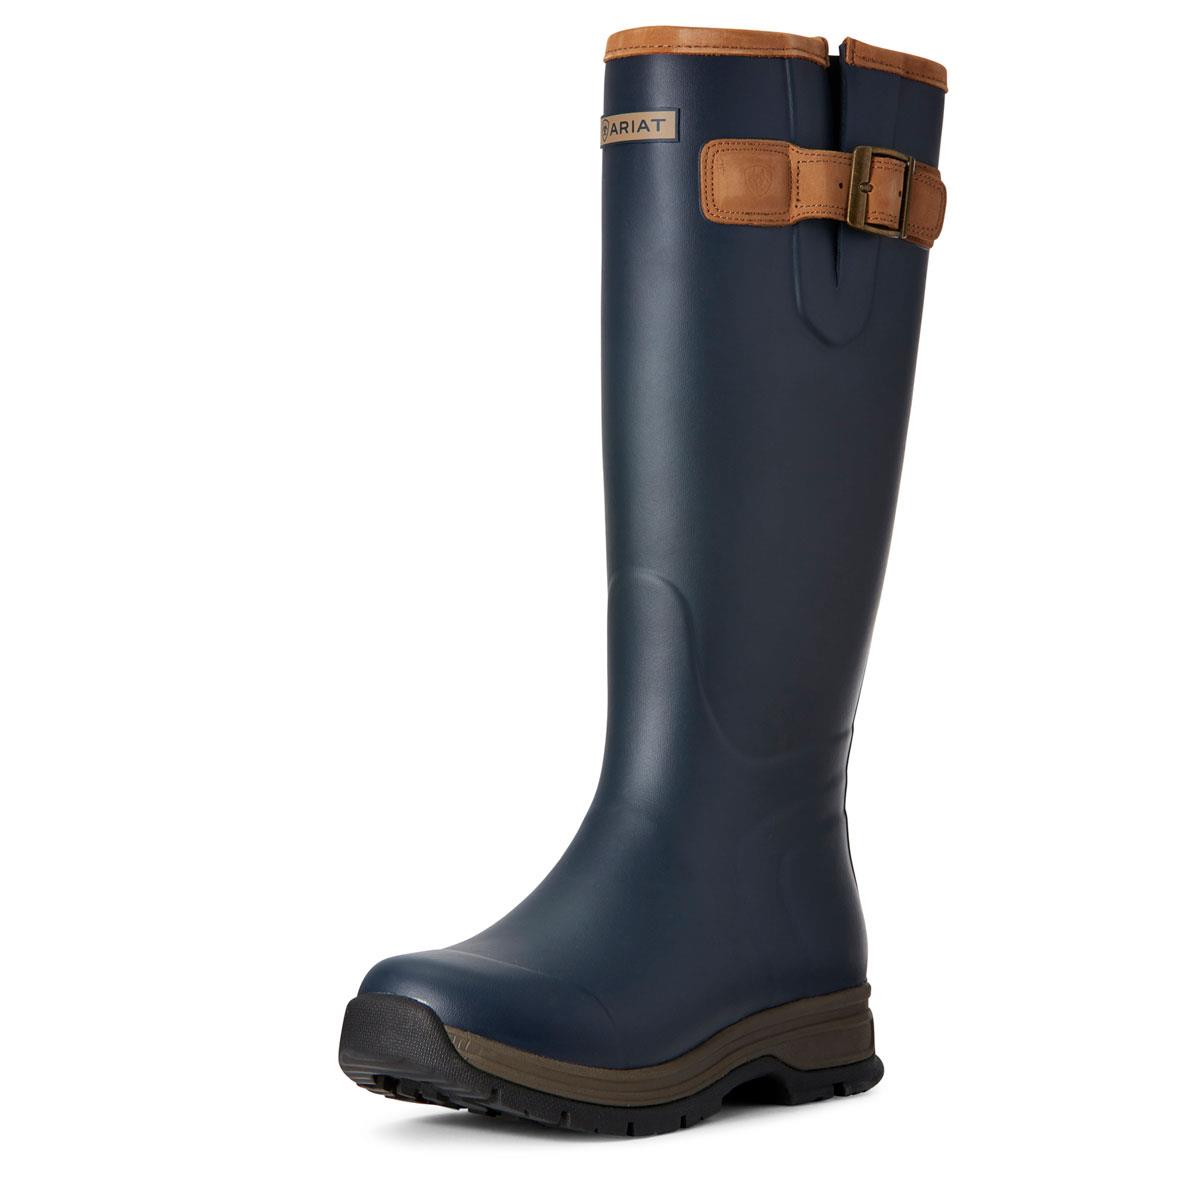 Ariat Womens Burford Wellington Boots Questions & Answers